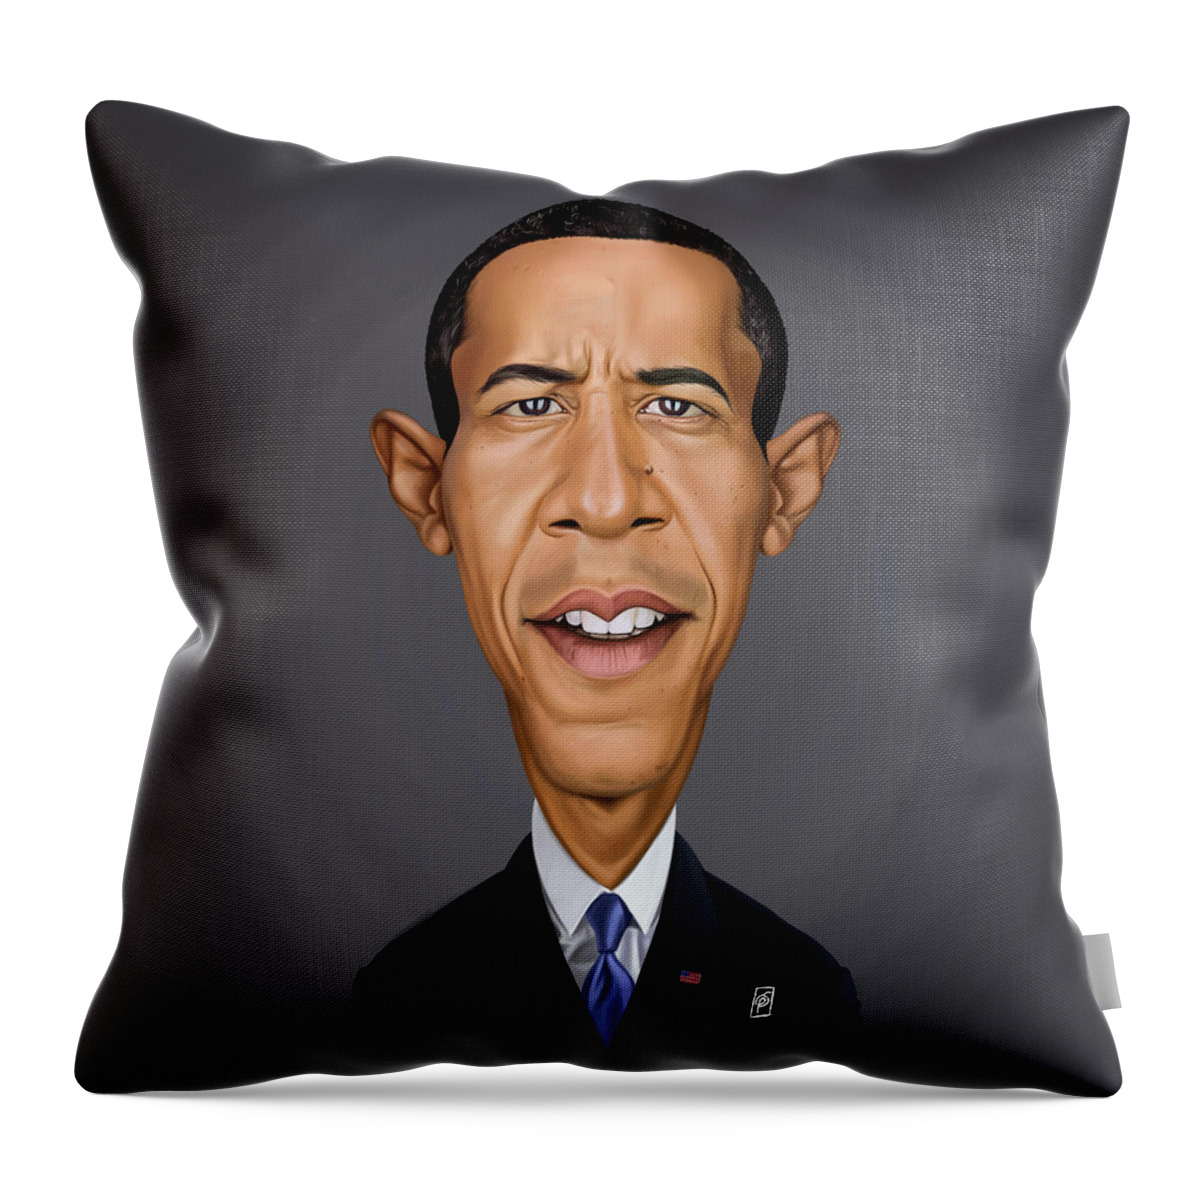 Illustration Throw Pillow featuring the digital art Celebrity Sunday - Barrack Obama by Rob Snow